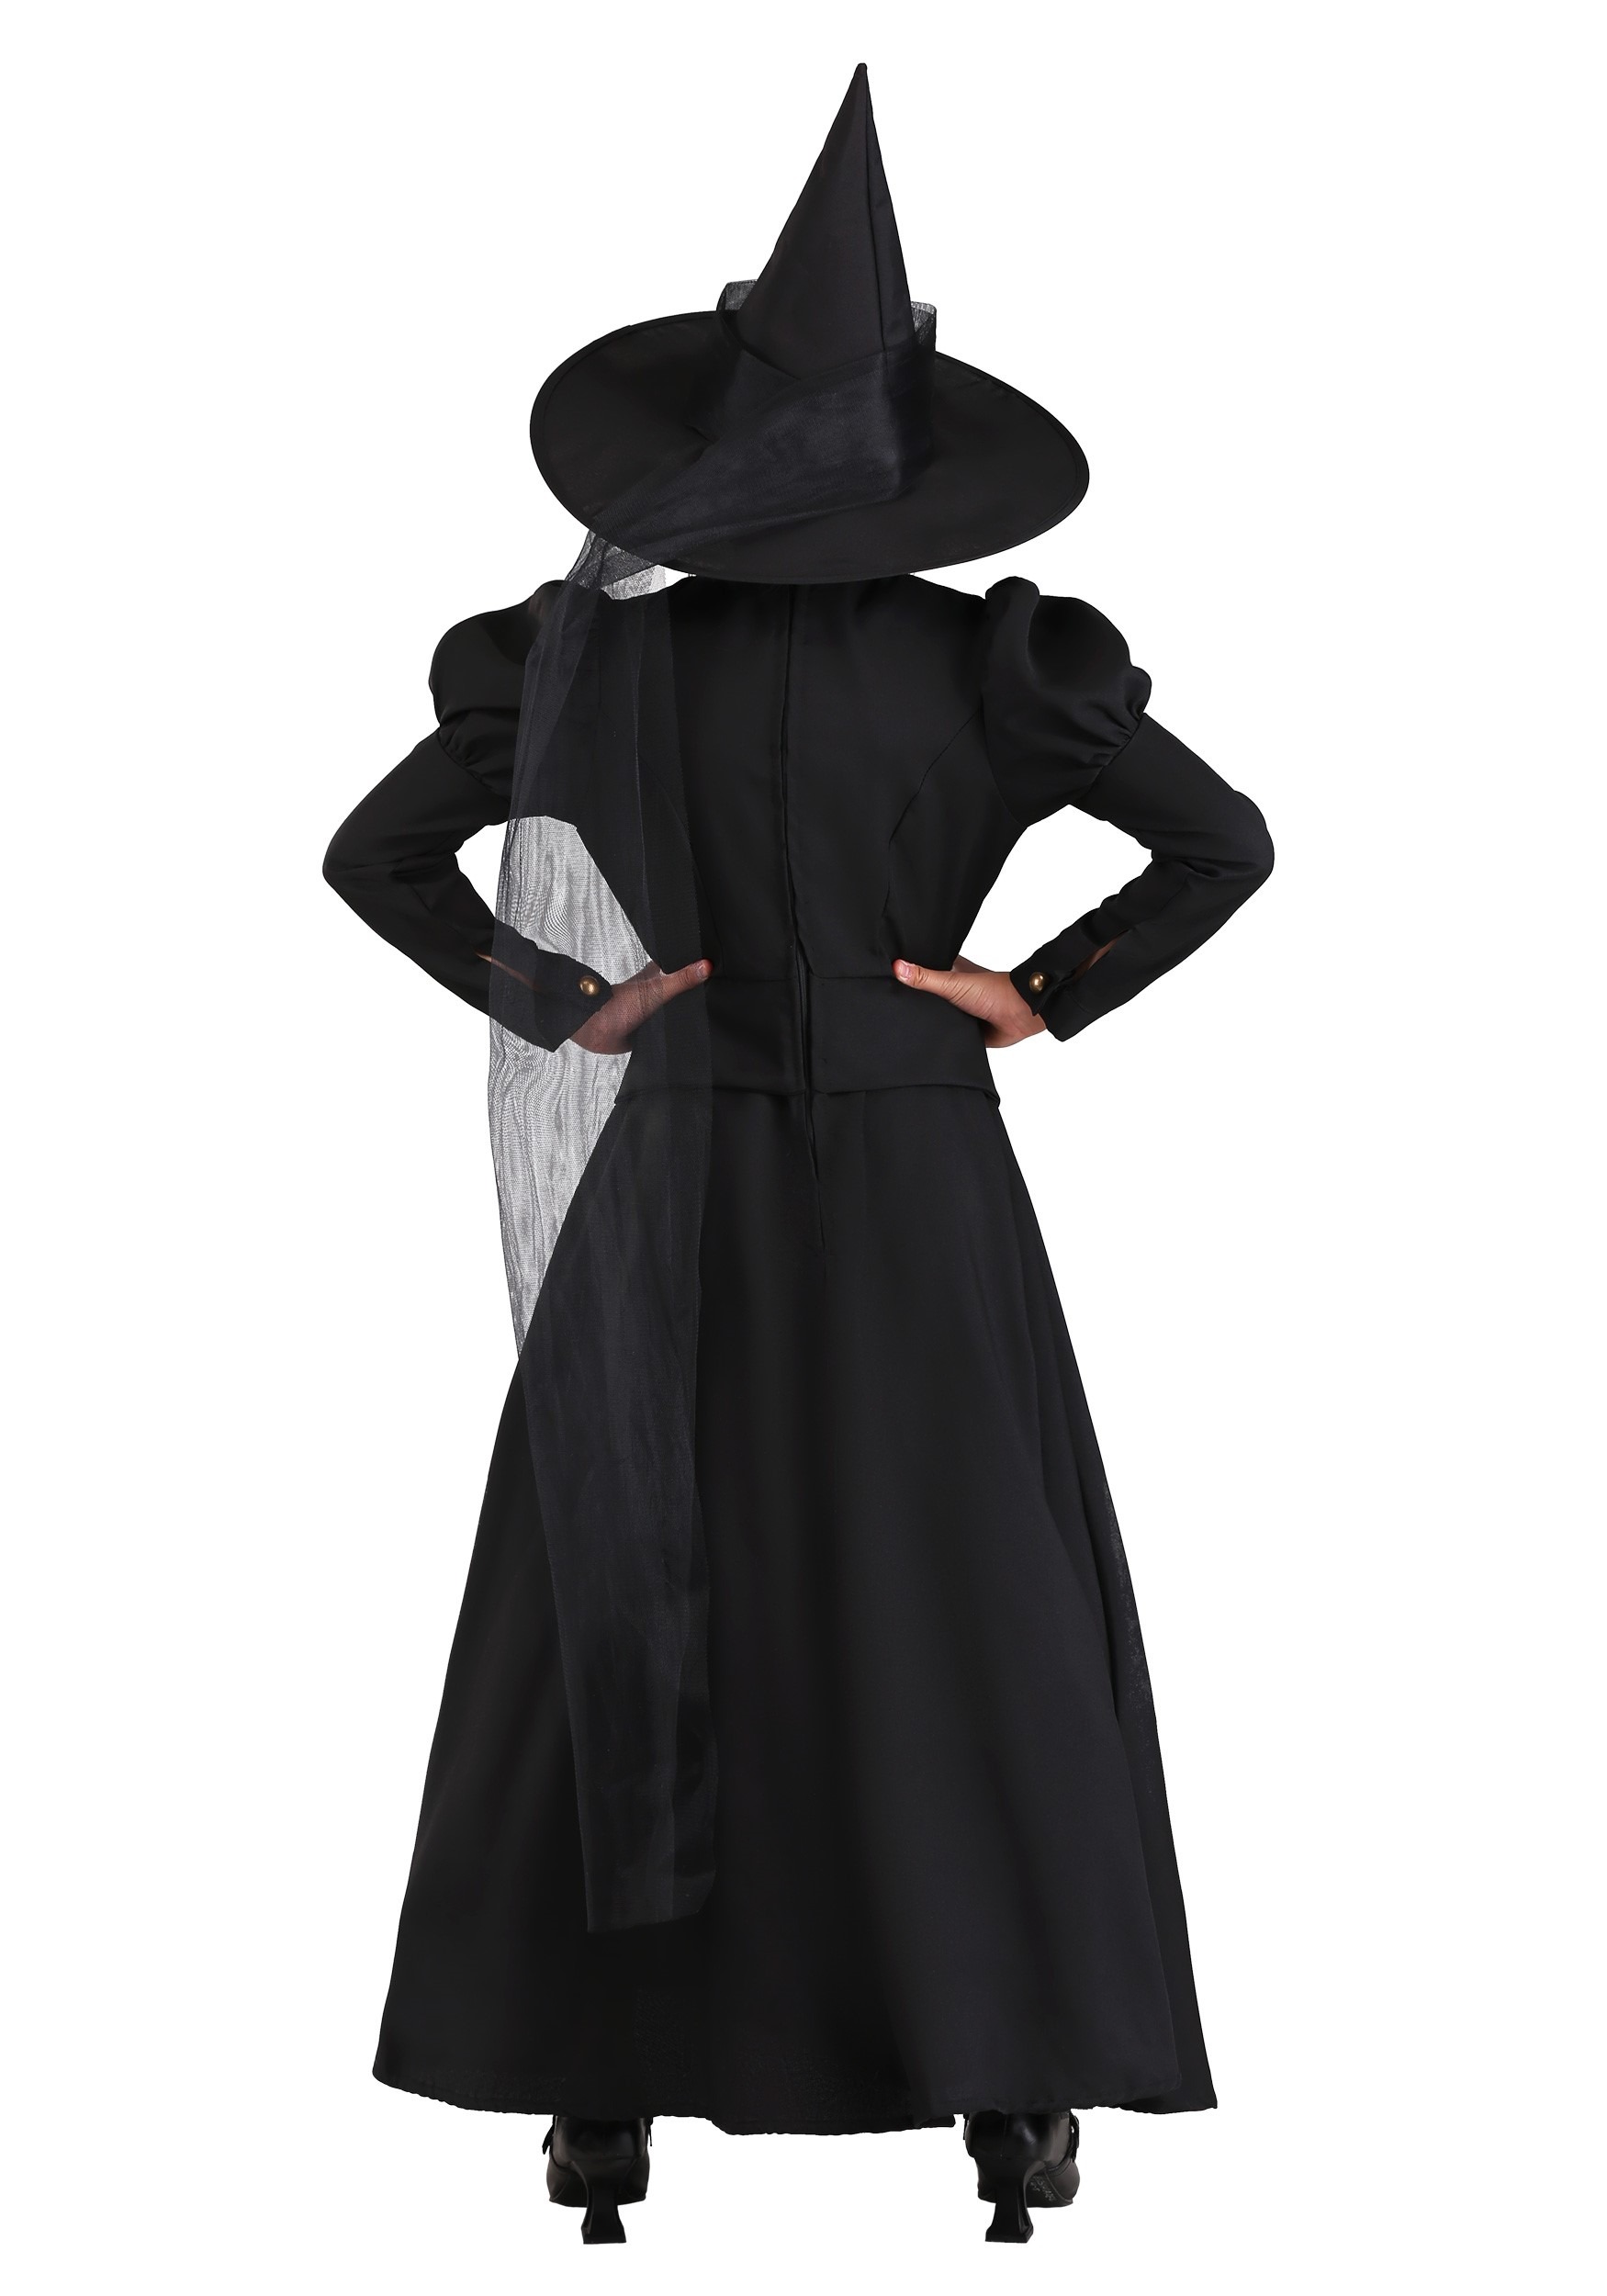 CHILD Small 4-6 Film-Stage Glamour Witch Deluxe HALLOWEEN Costume with Hat 